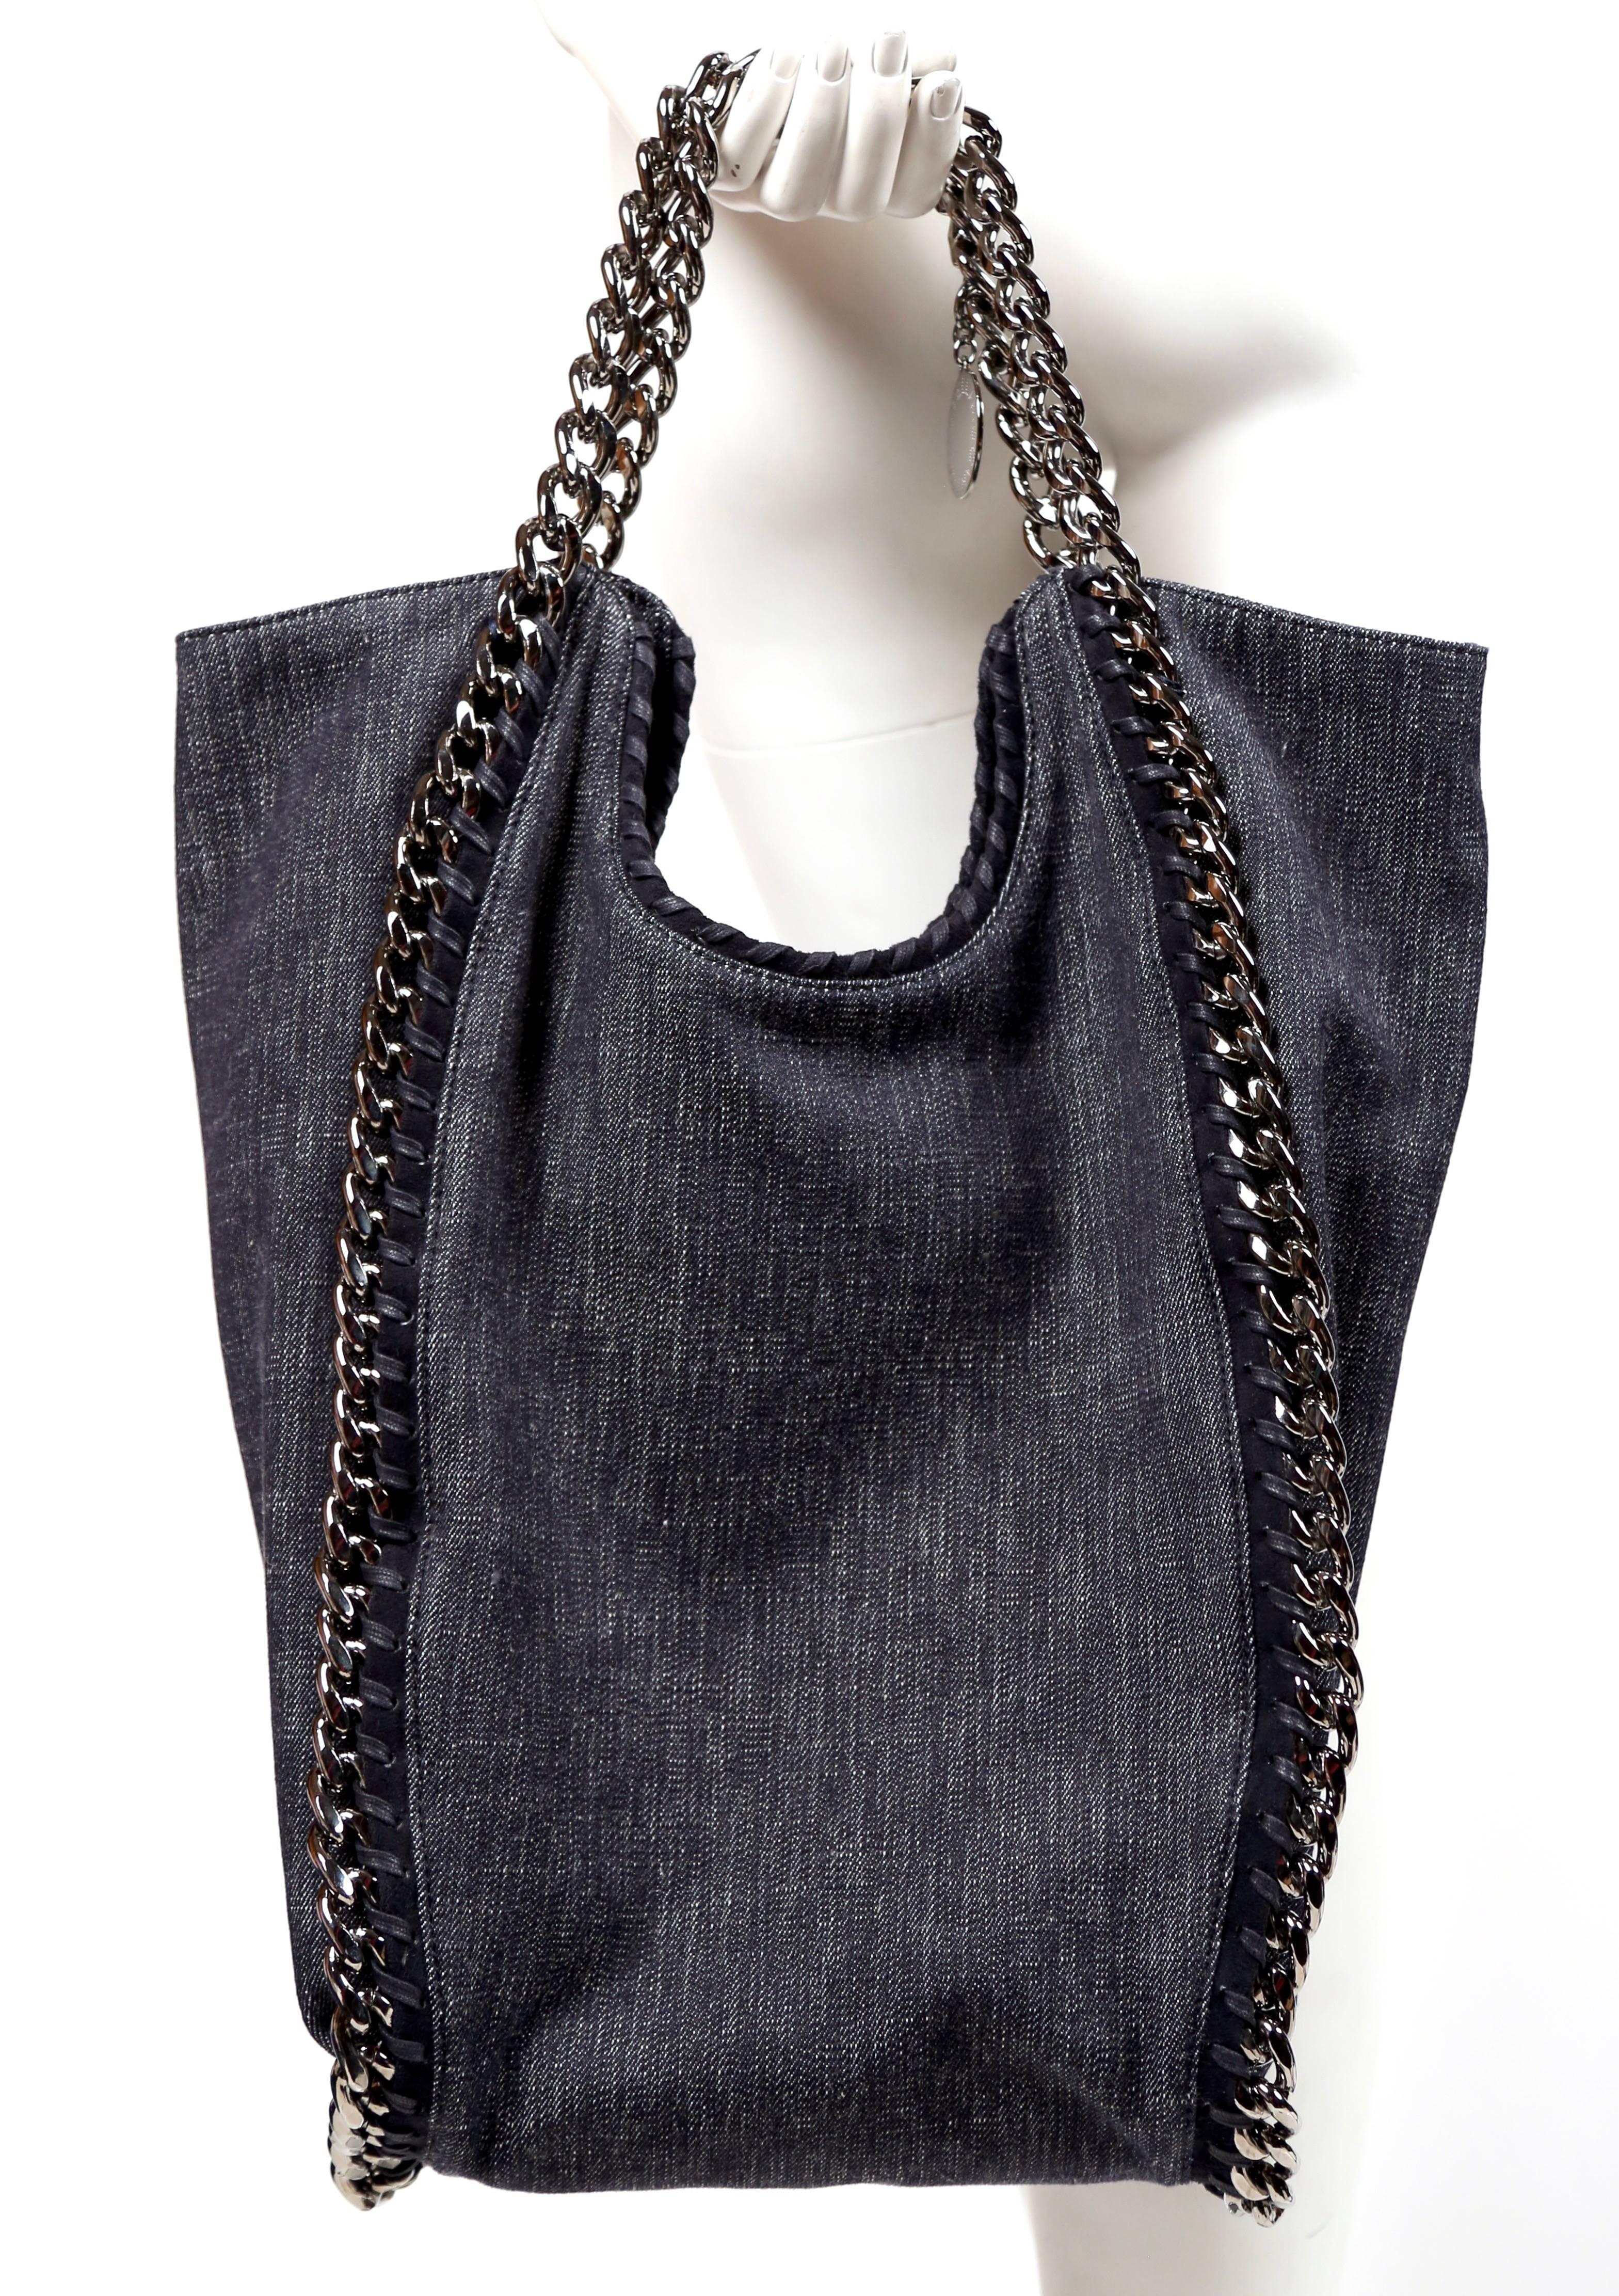 Dark denim tote bag with silver-tone hardware, dual chain-link shoulder straps, whipstitching and chain-link details designed by Stella McCartney. Approximate measurements: width 16.5